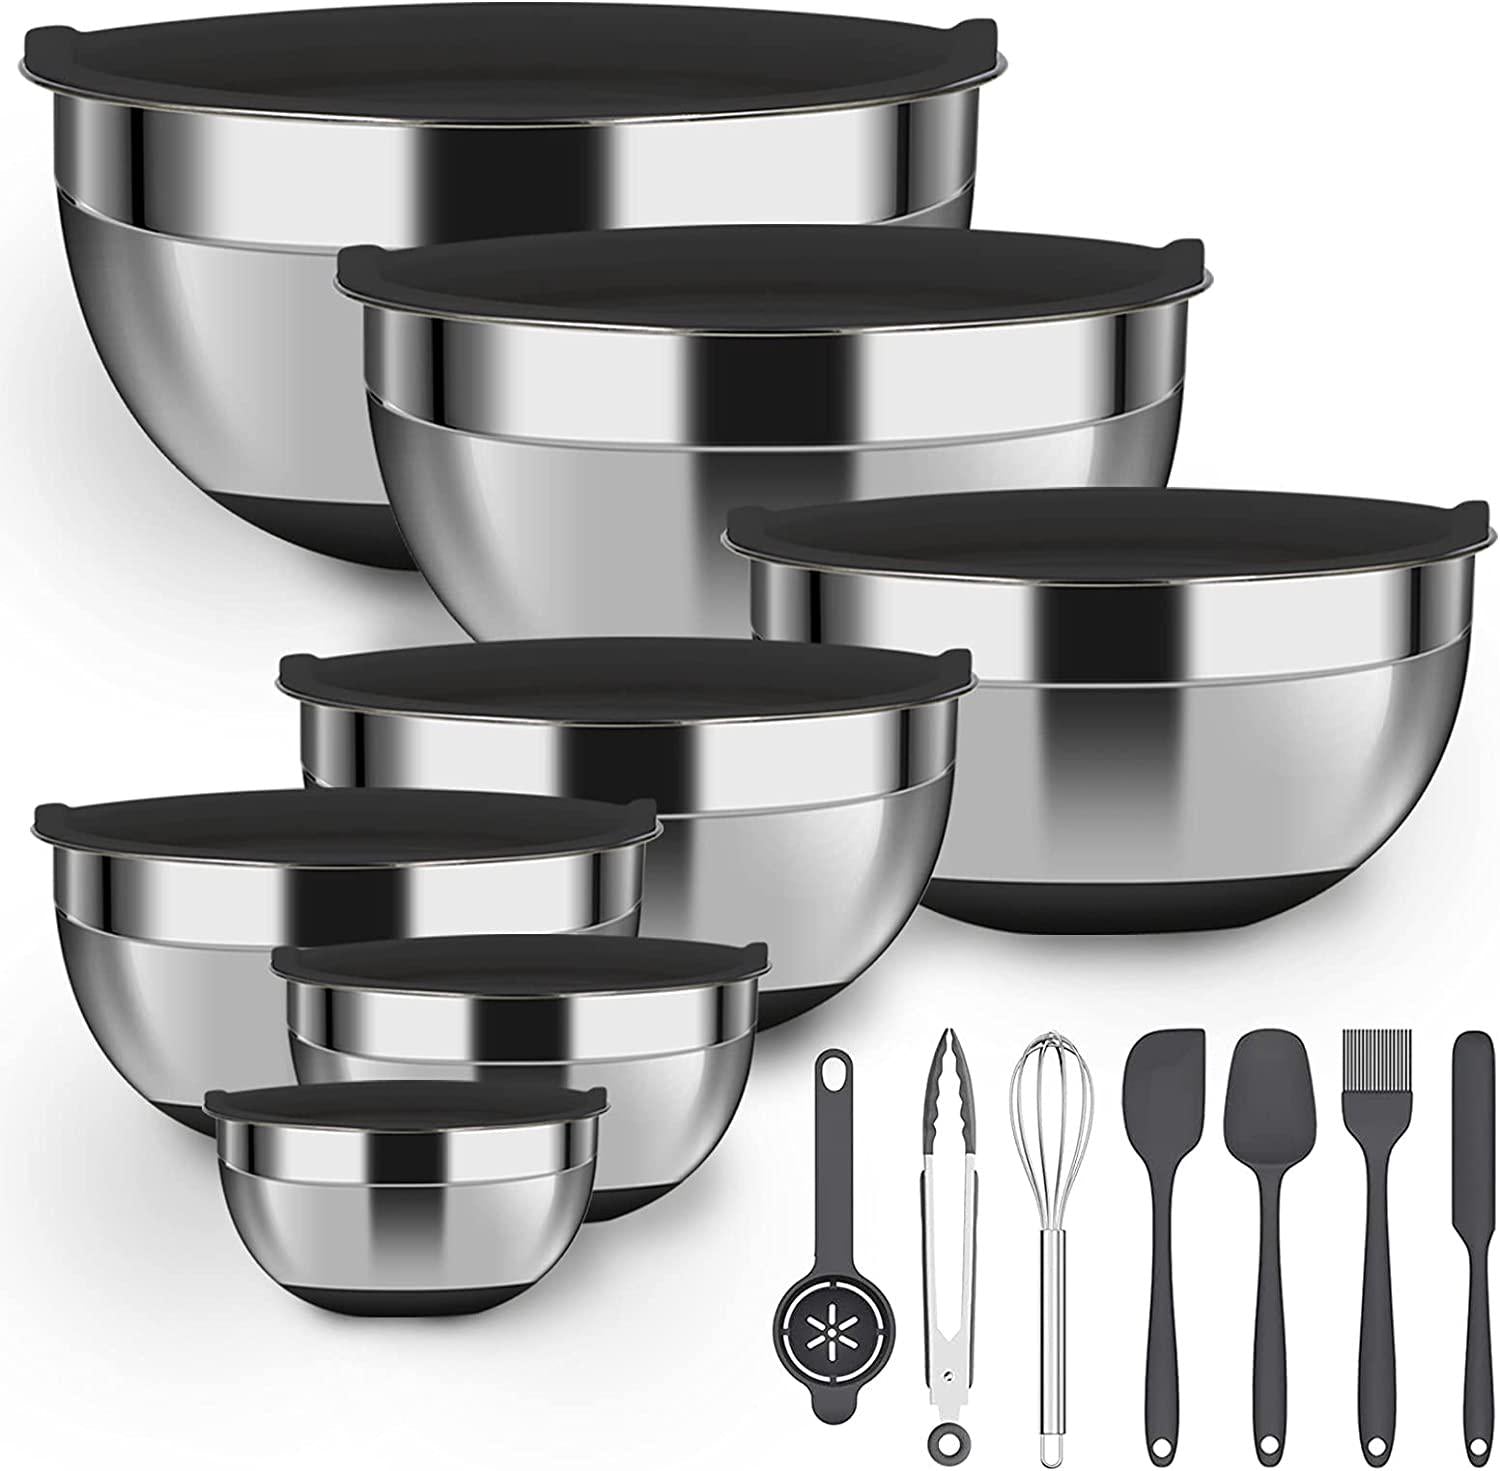 Luvan, Luvan Mixing Bowls with Lids Set , 21 Piece Stainless Steel Metal Mixing Bowls with Non-Slip Silicone Bottom, Kitchen Nesting Bowls for Space Saving,Great for Mixing ,Cooking ,Serving,Prepping (Black)